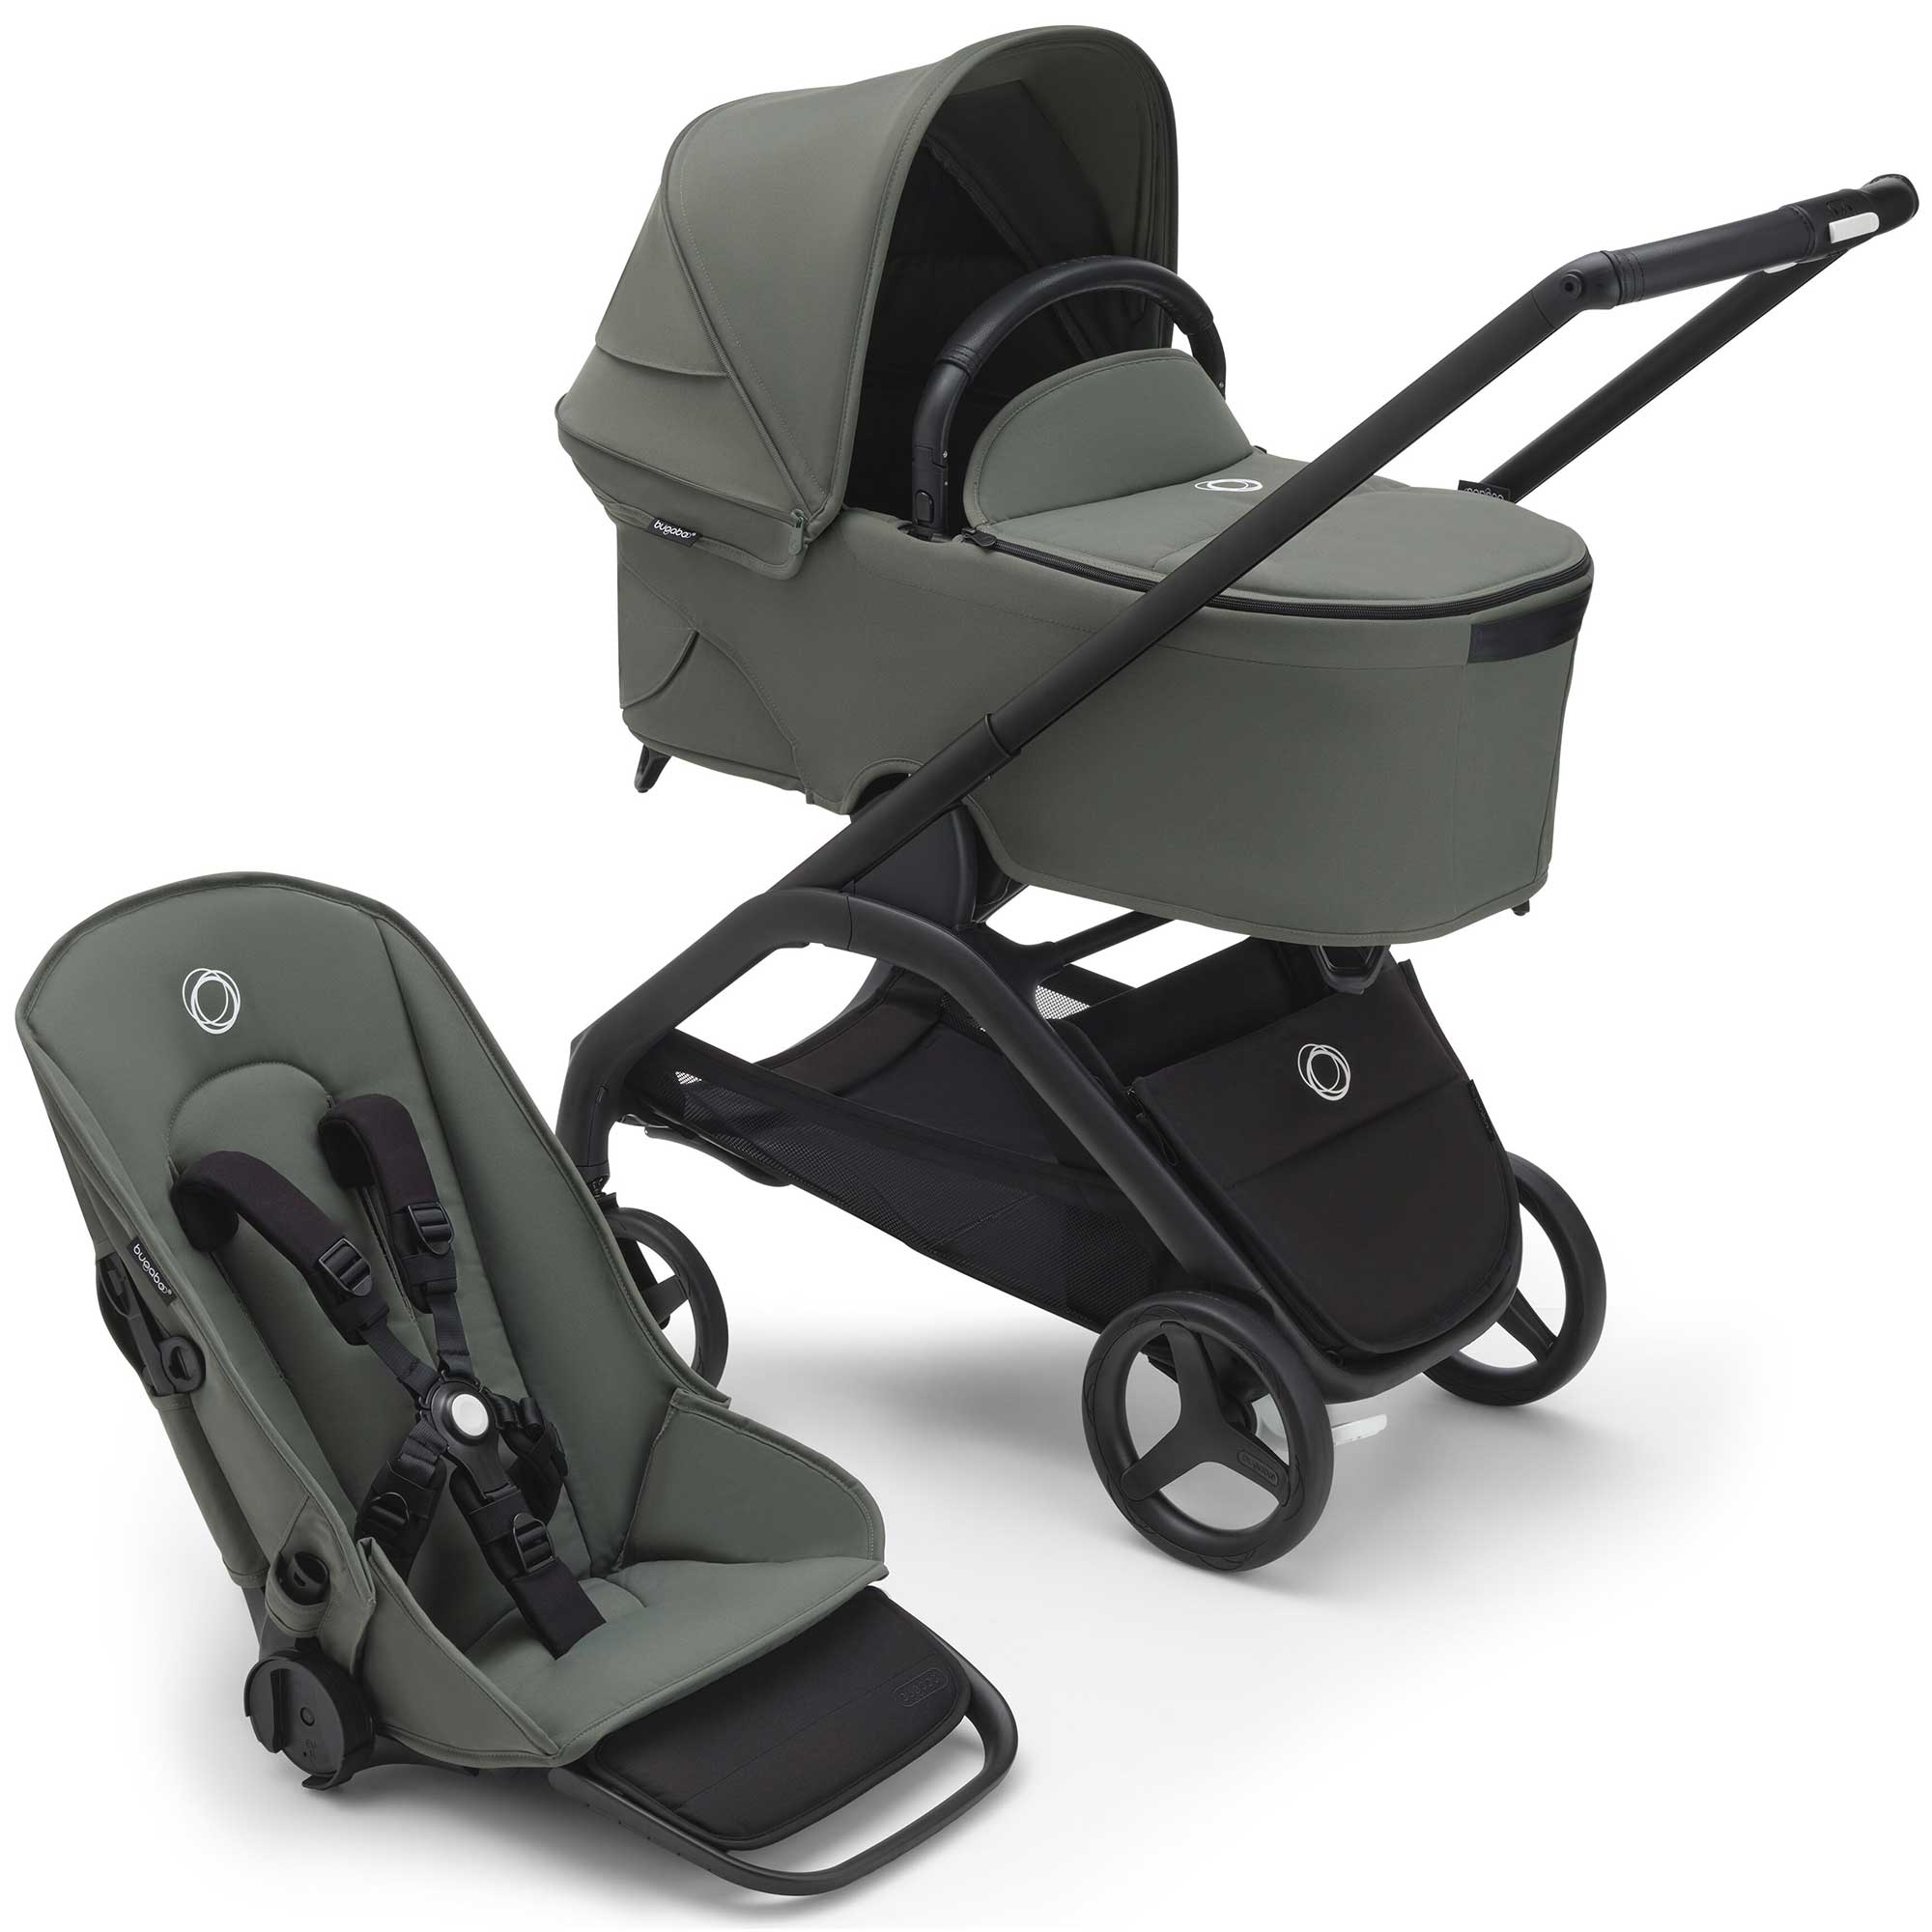 Bugaboo Dragonfly Complete Bundle - Black/Forest Green Baby Prams 13814-BLK-FOR-GRN 8717447581772